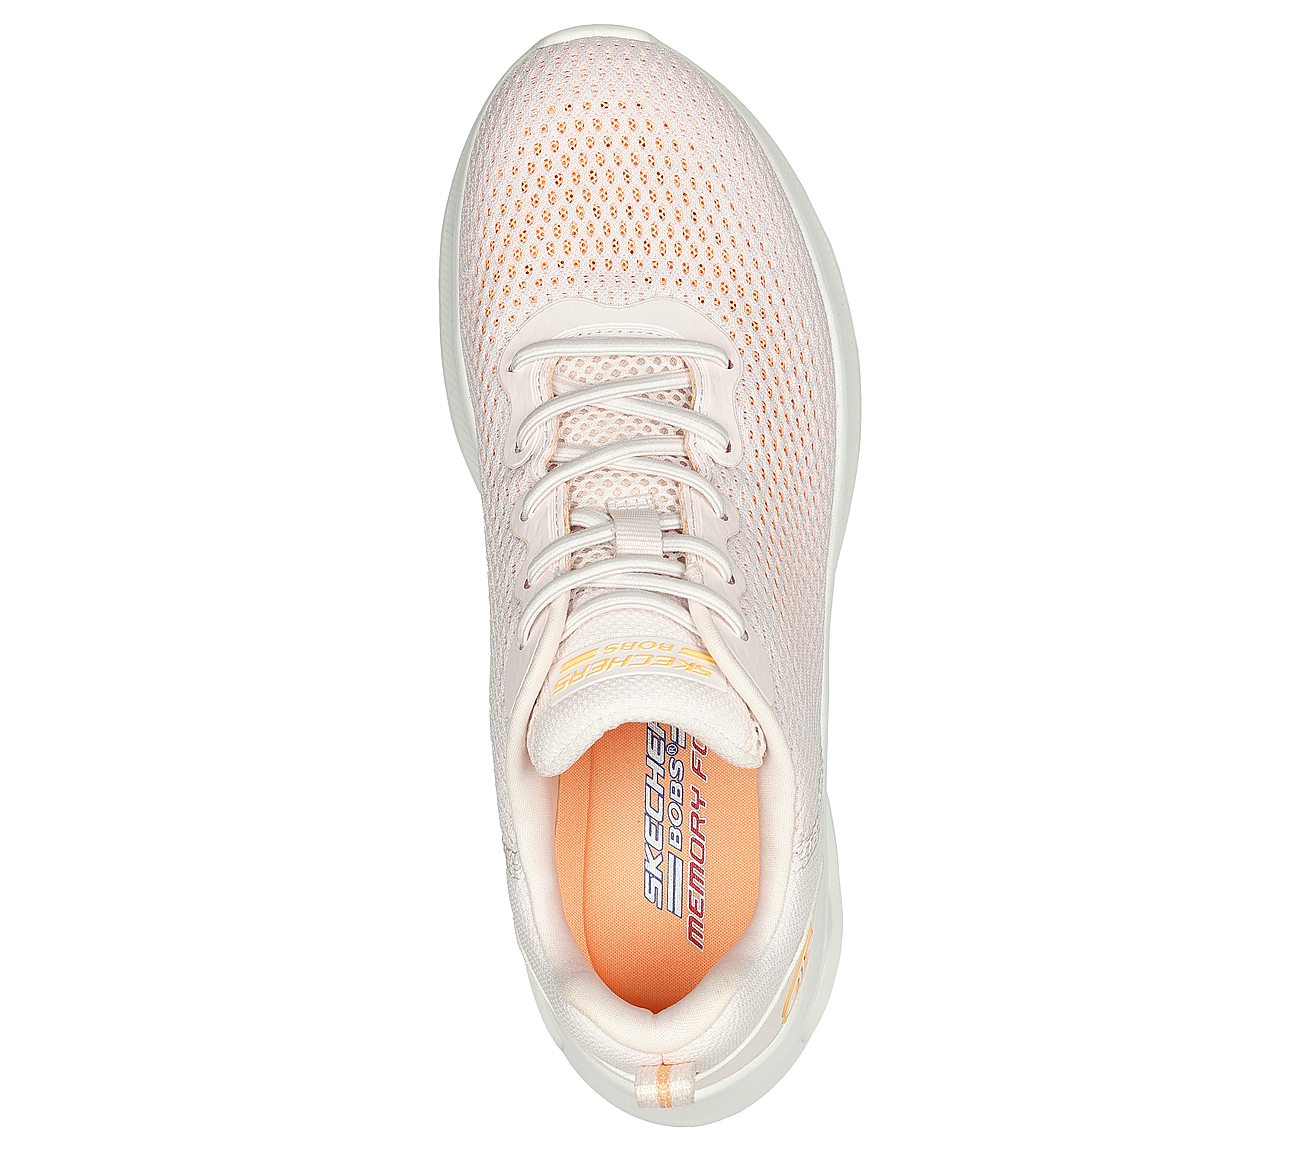 BOBS UNITY - HINT OF COLOR, NATURAL/ORANGE Footwear Top View